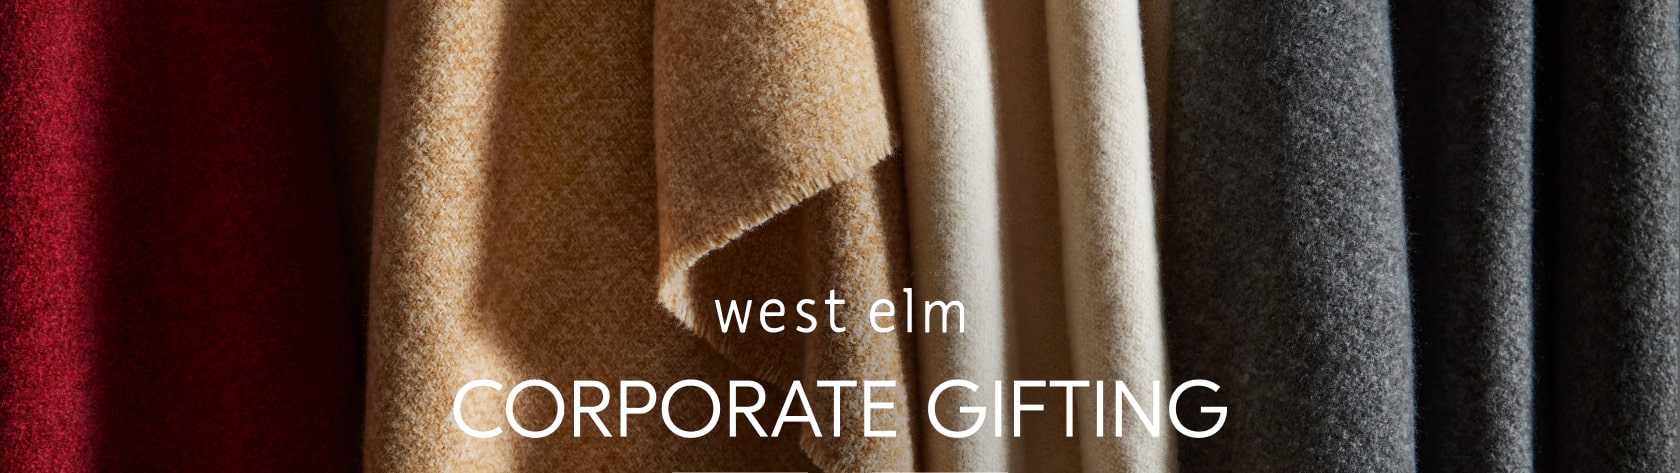 west elm corporate gifting